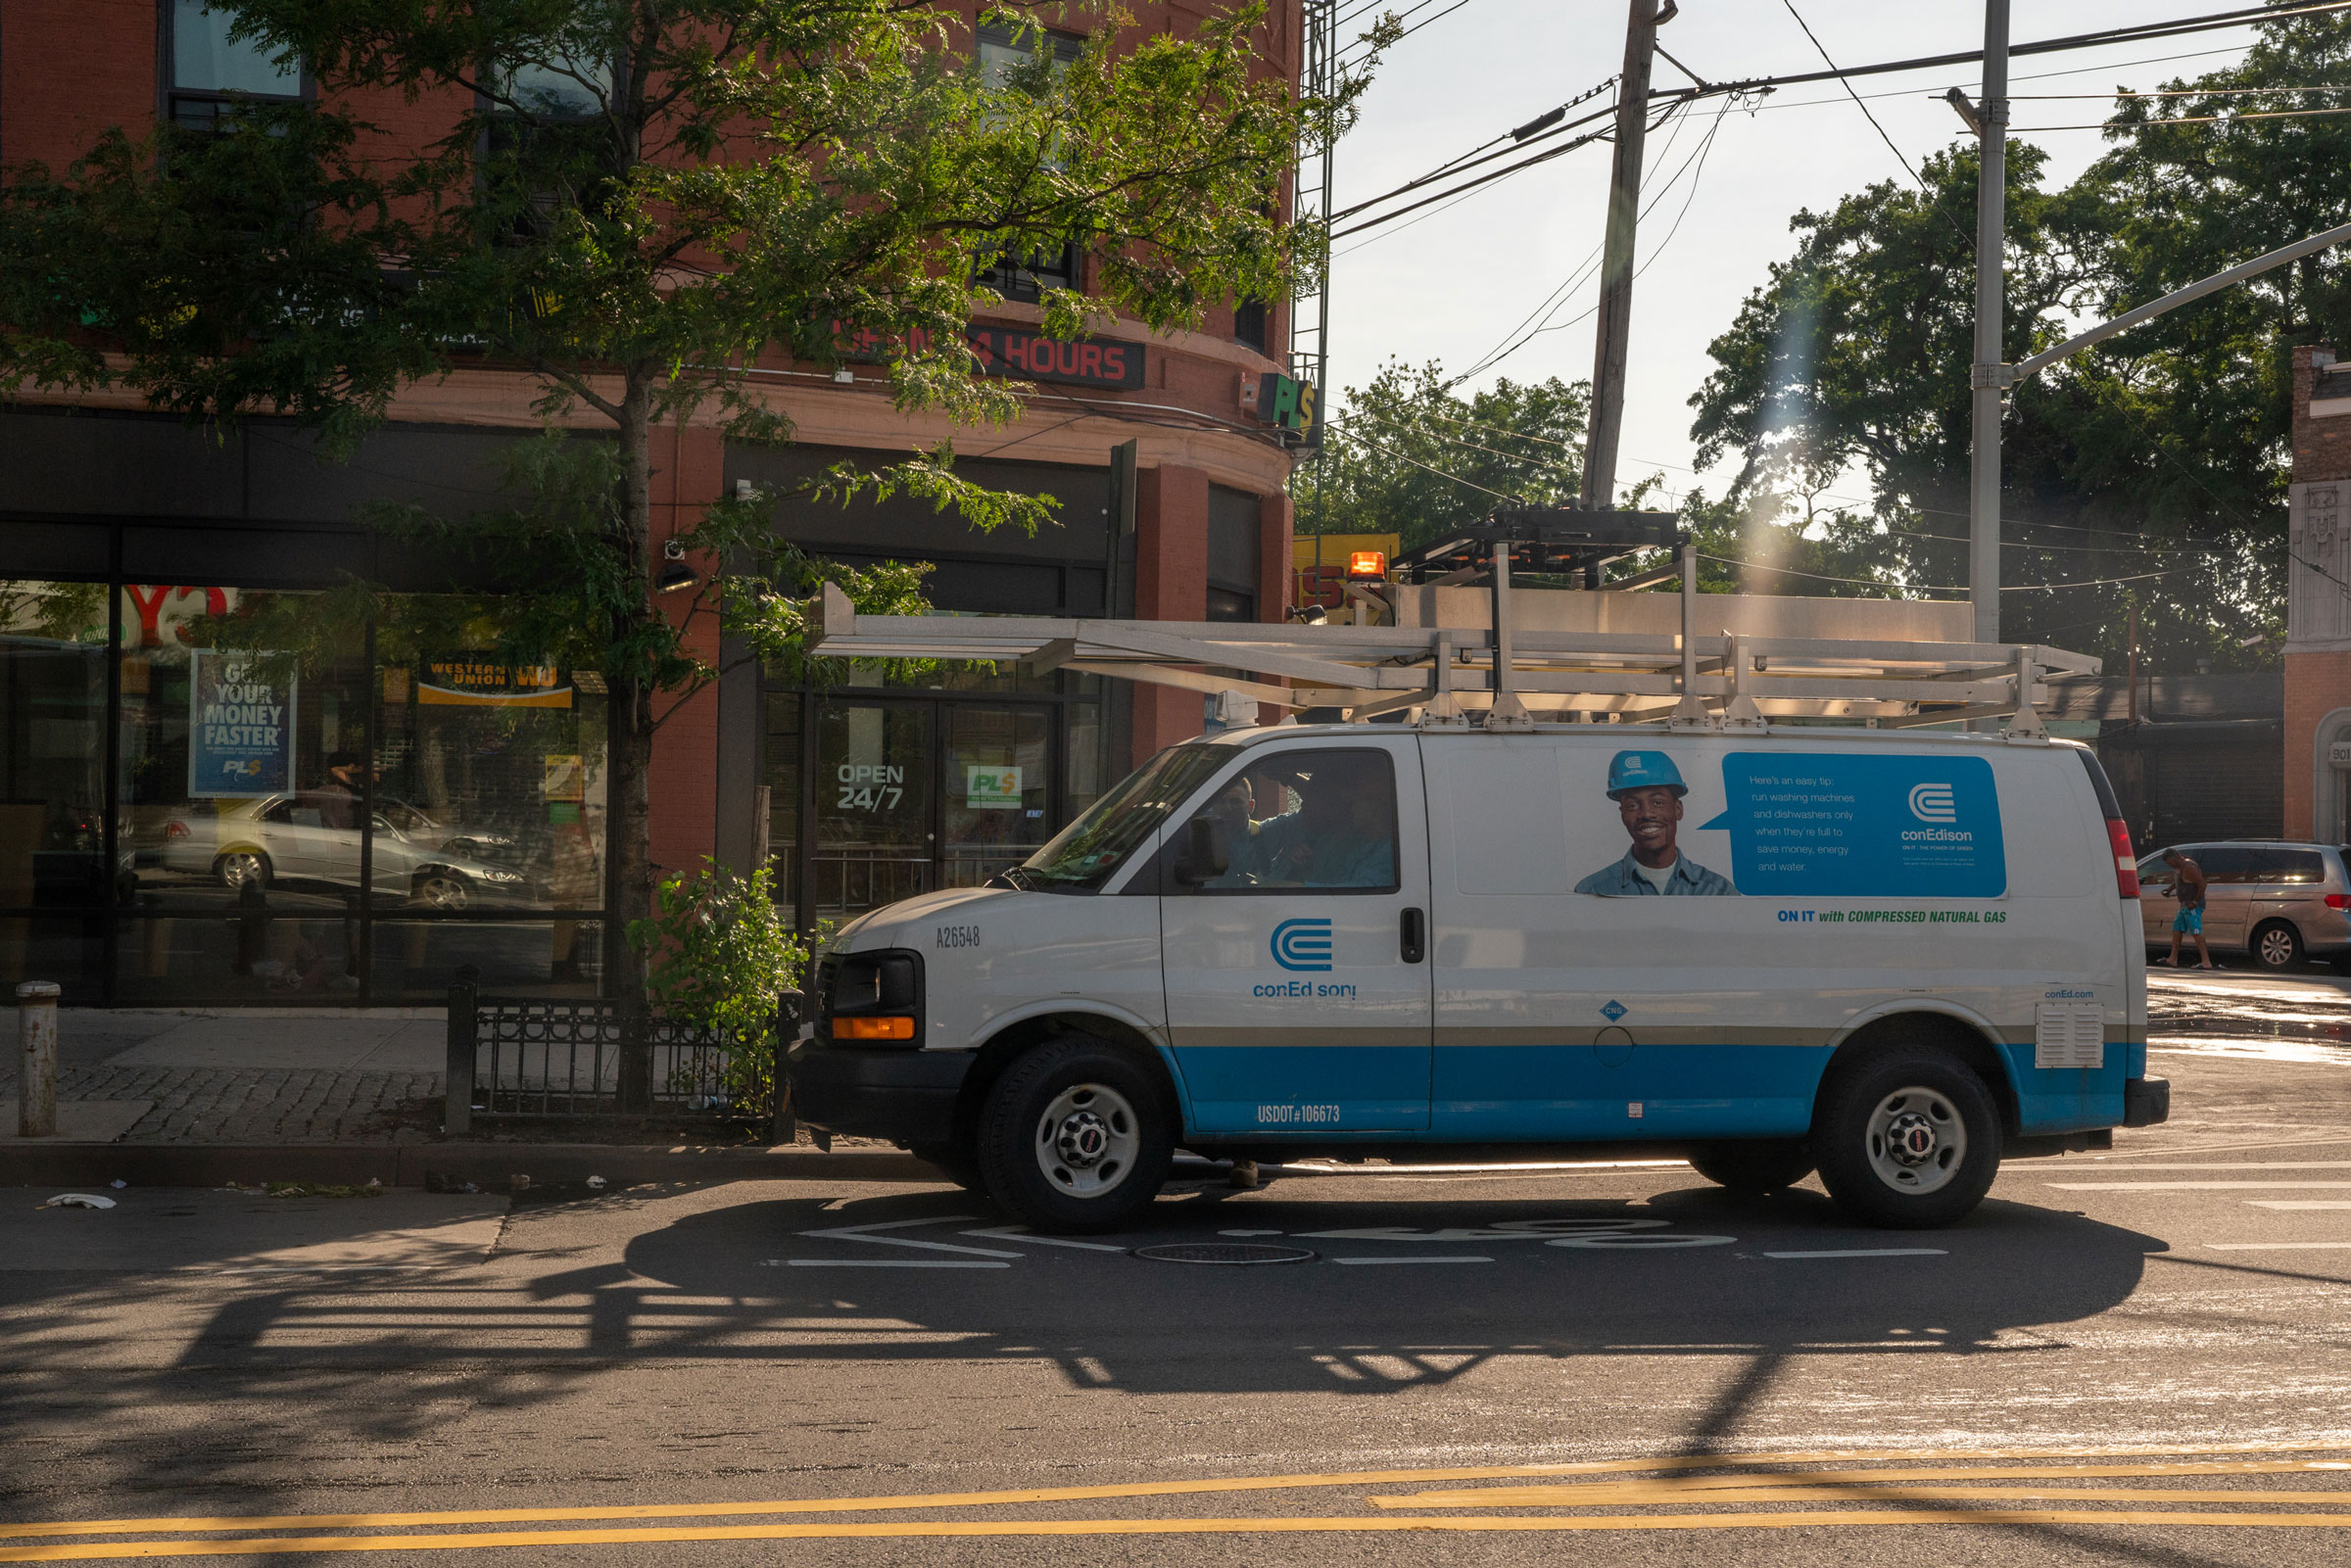 A Consolidated Edison Inc. van sits parked on a street in the Bronx